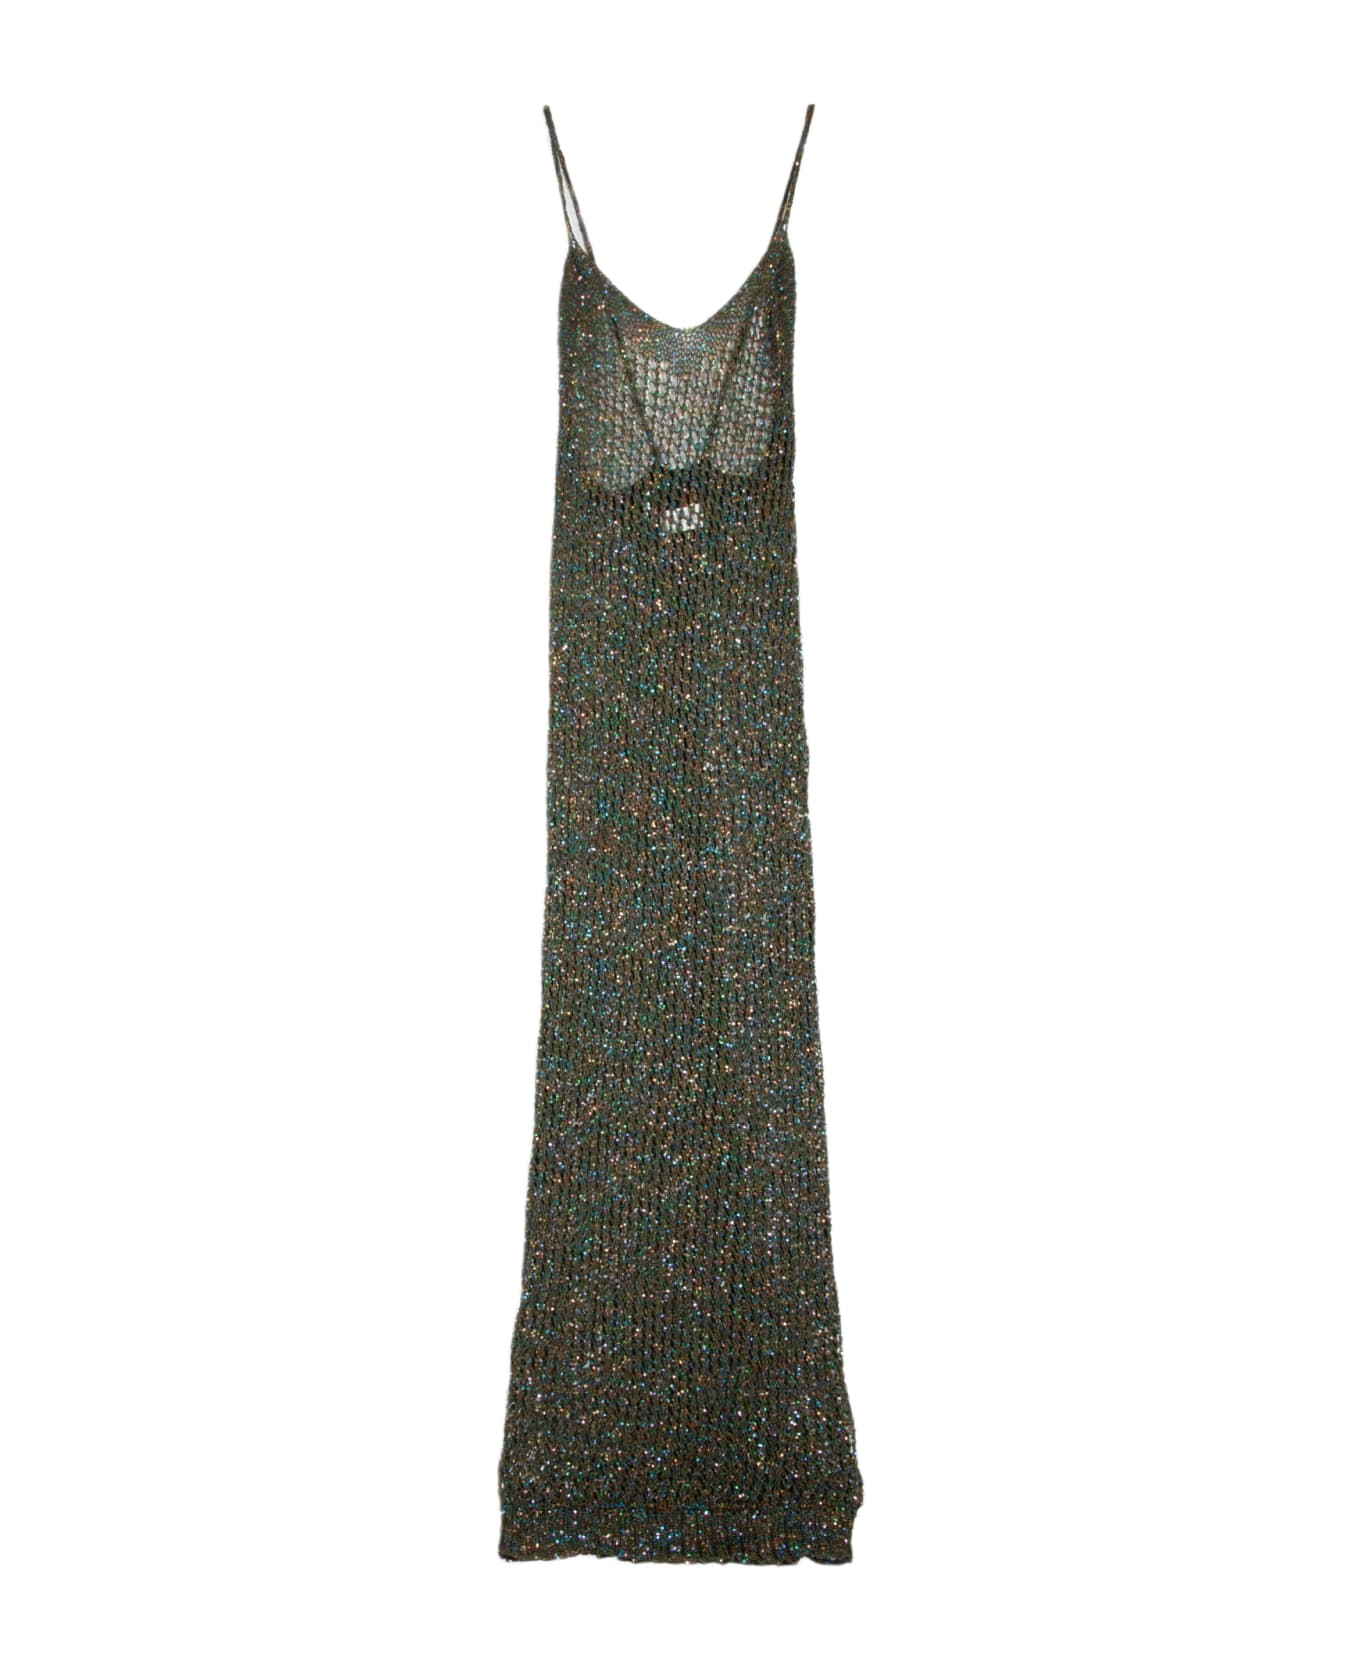 Laneus Pailletes Dress Woman Military green net knitted long dress with sequins - Verde militare